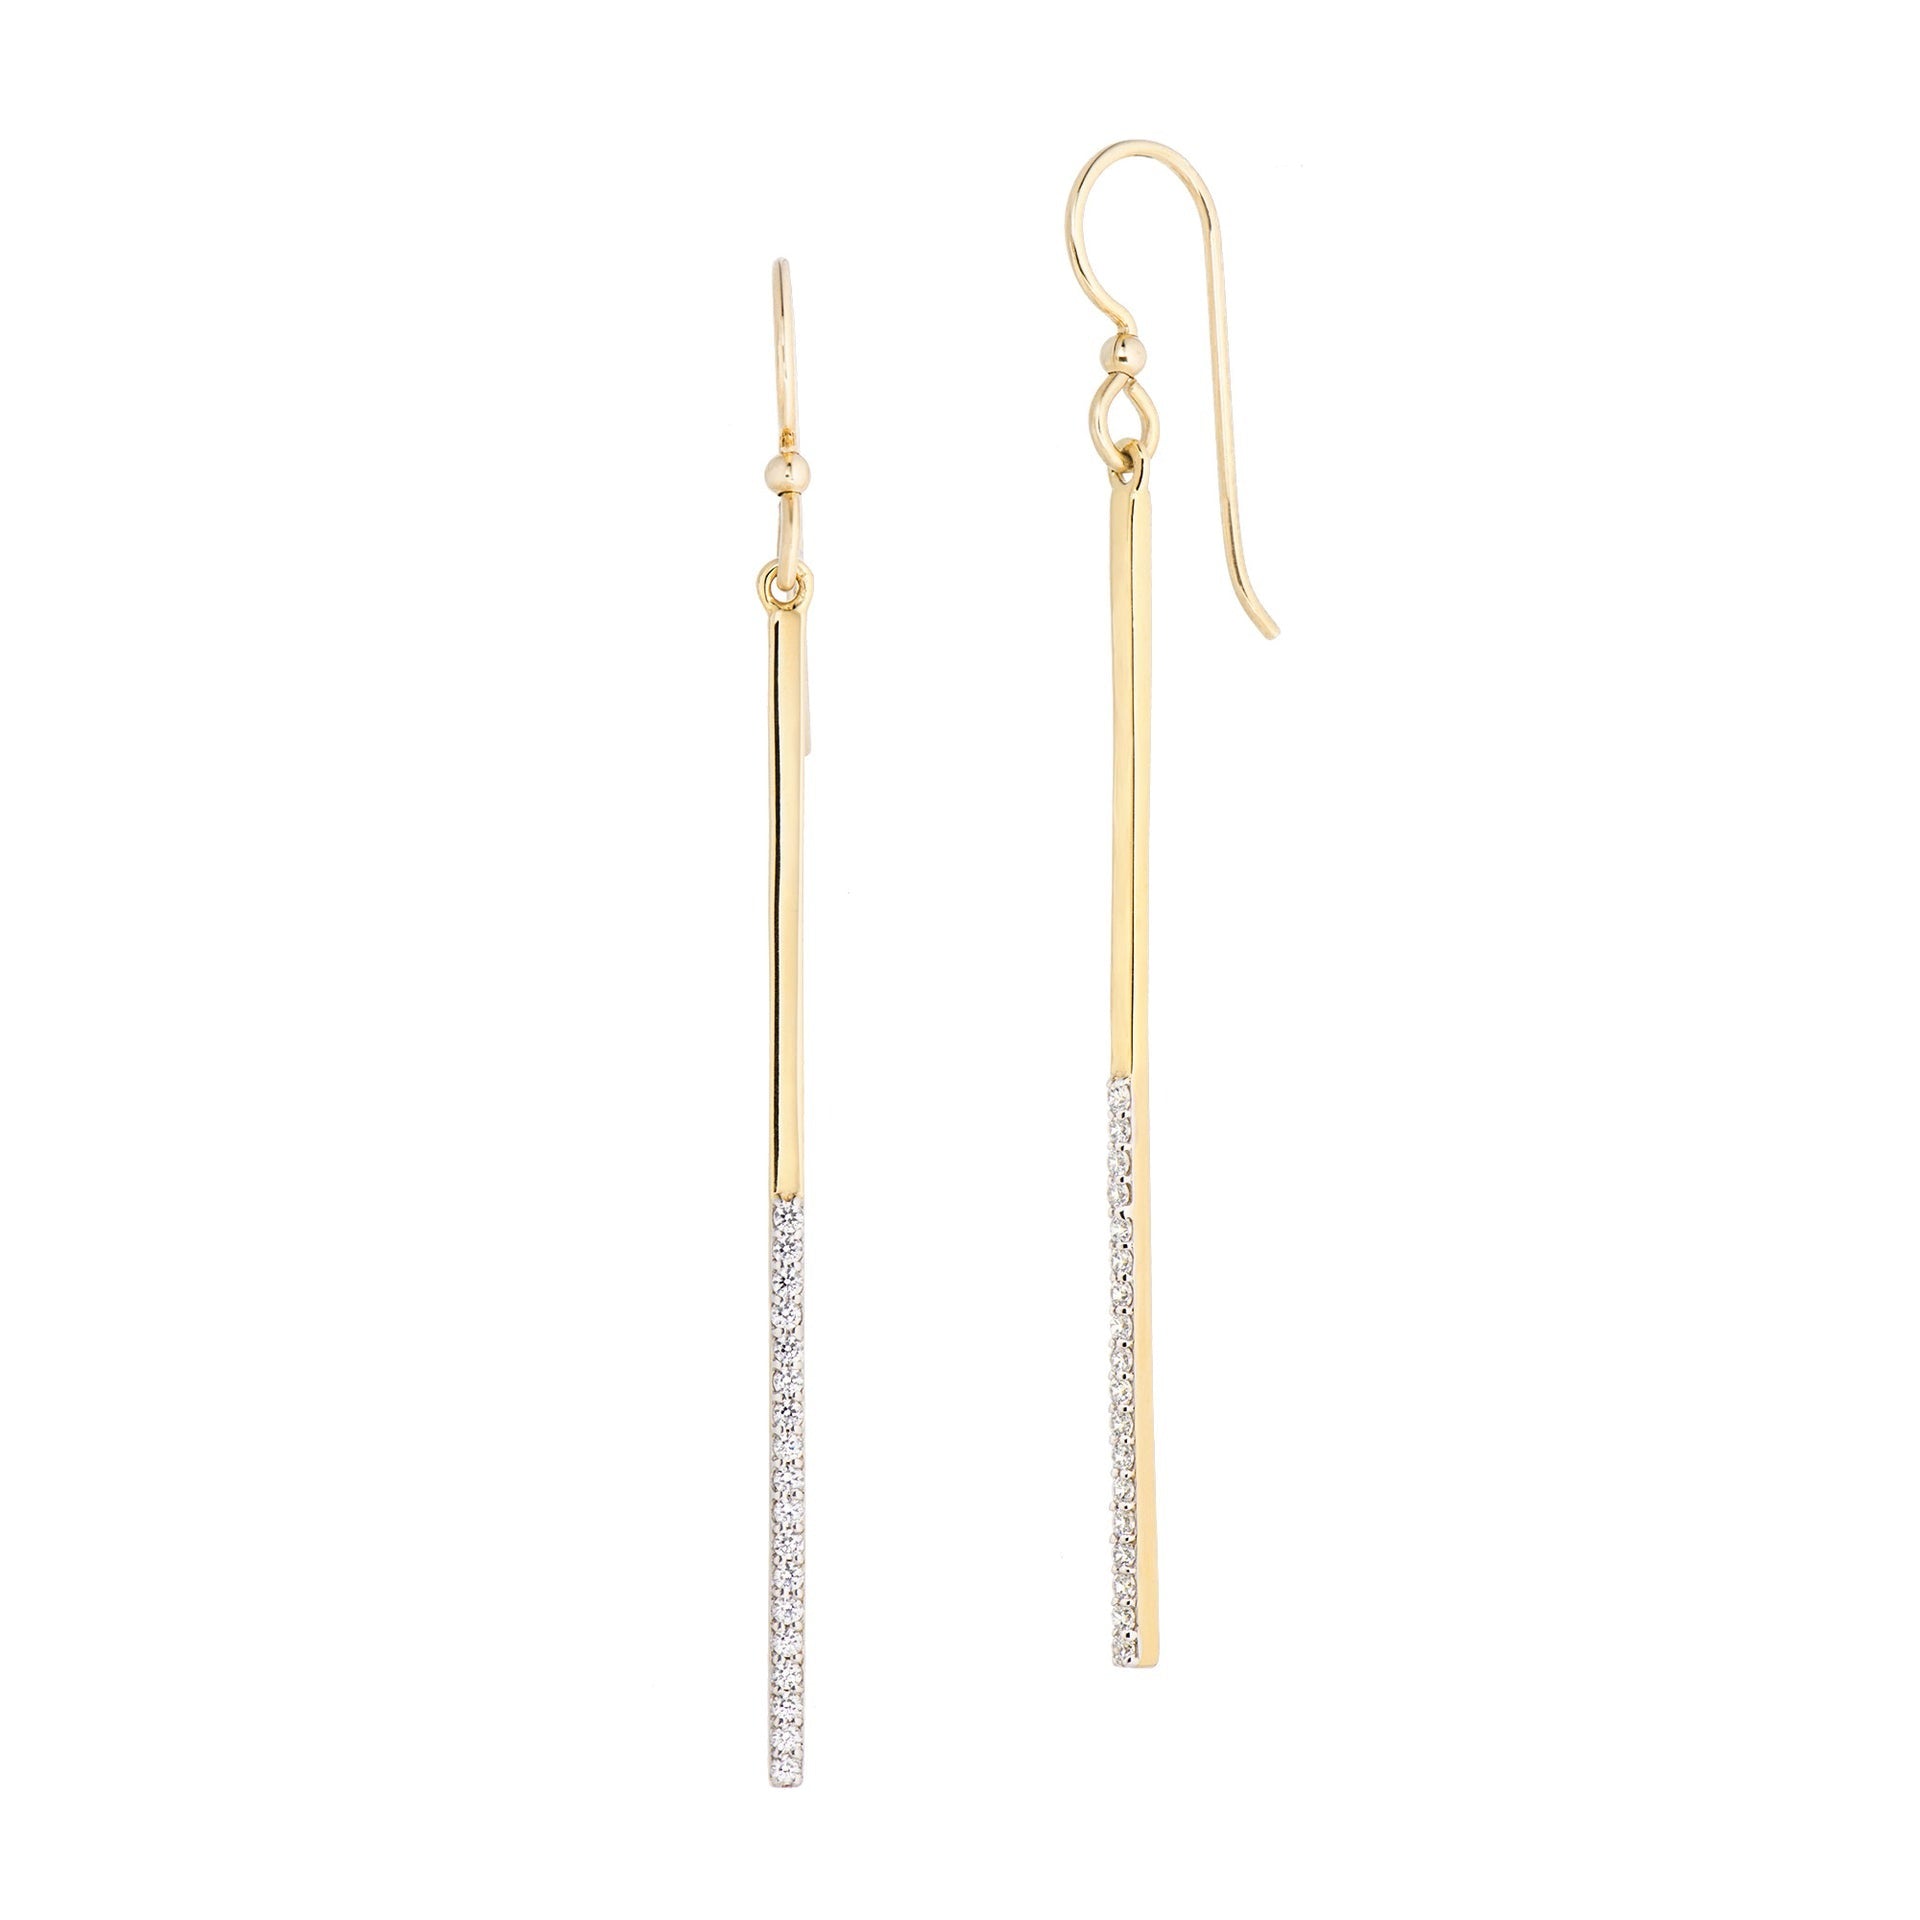 Pindrop Earrings Gold